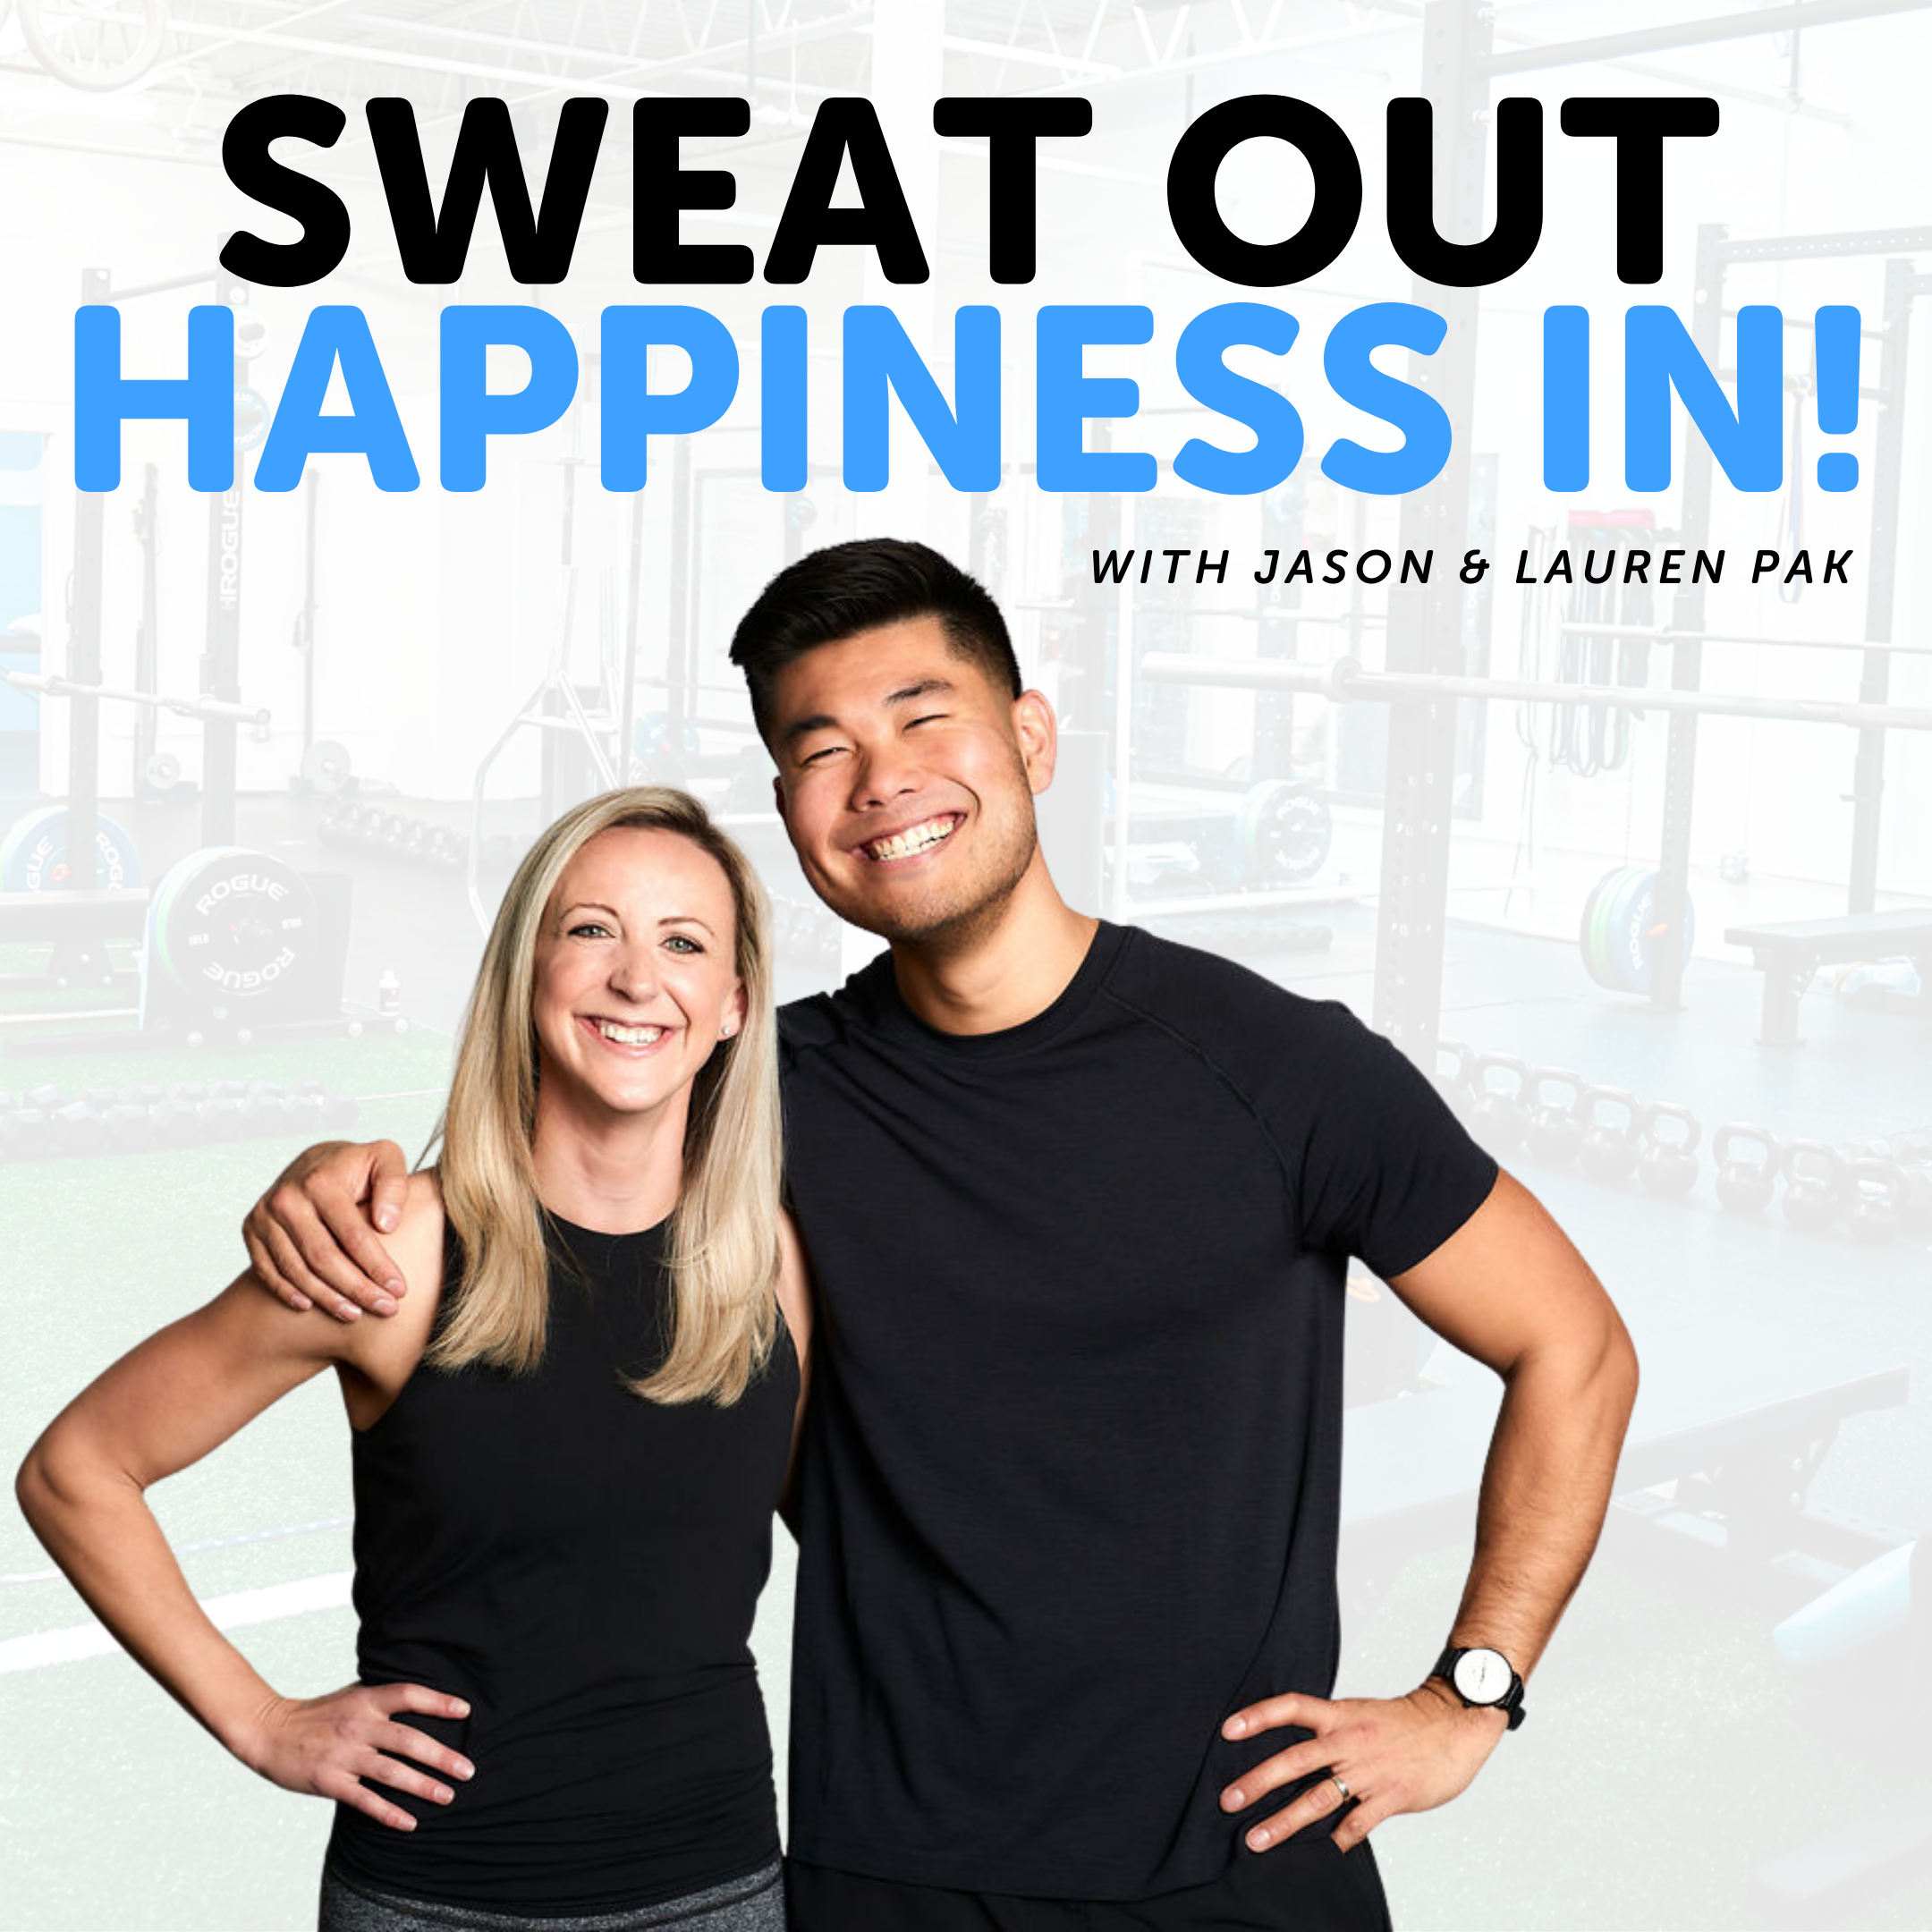 #AskAchieve 122: AchieveOnline, Tips for Avoiding Workout Plateaus, the Best Ways to Mentally/Physically Prepare for Surgery, and If It's a Dealbreaker if Your Partner Isn't as Into Fitness as You!